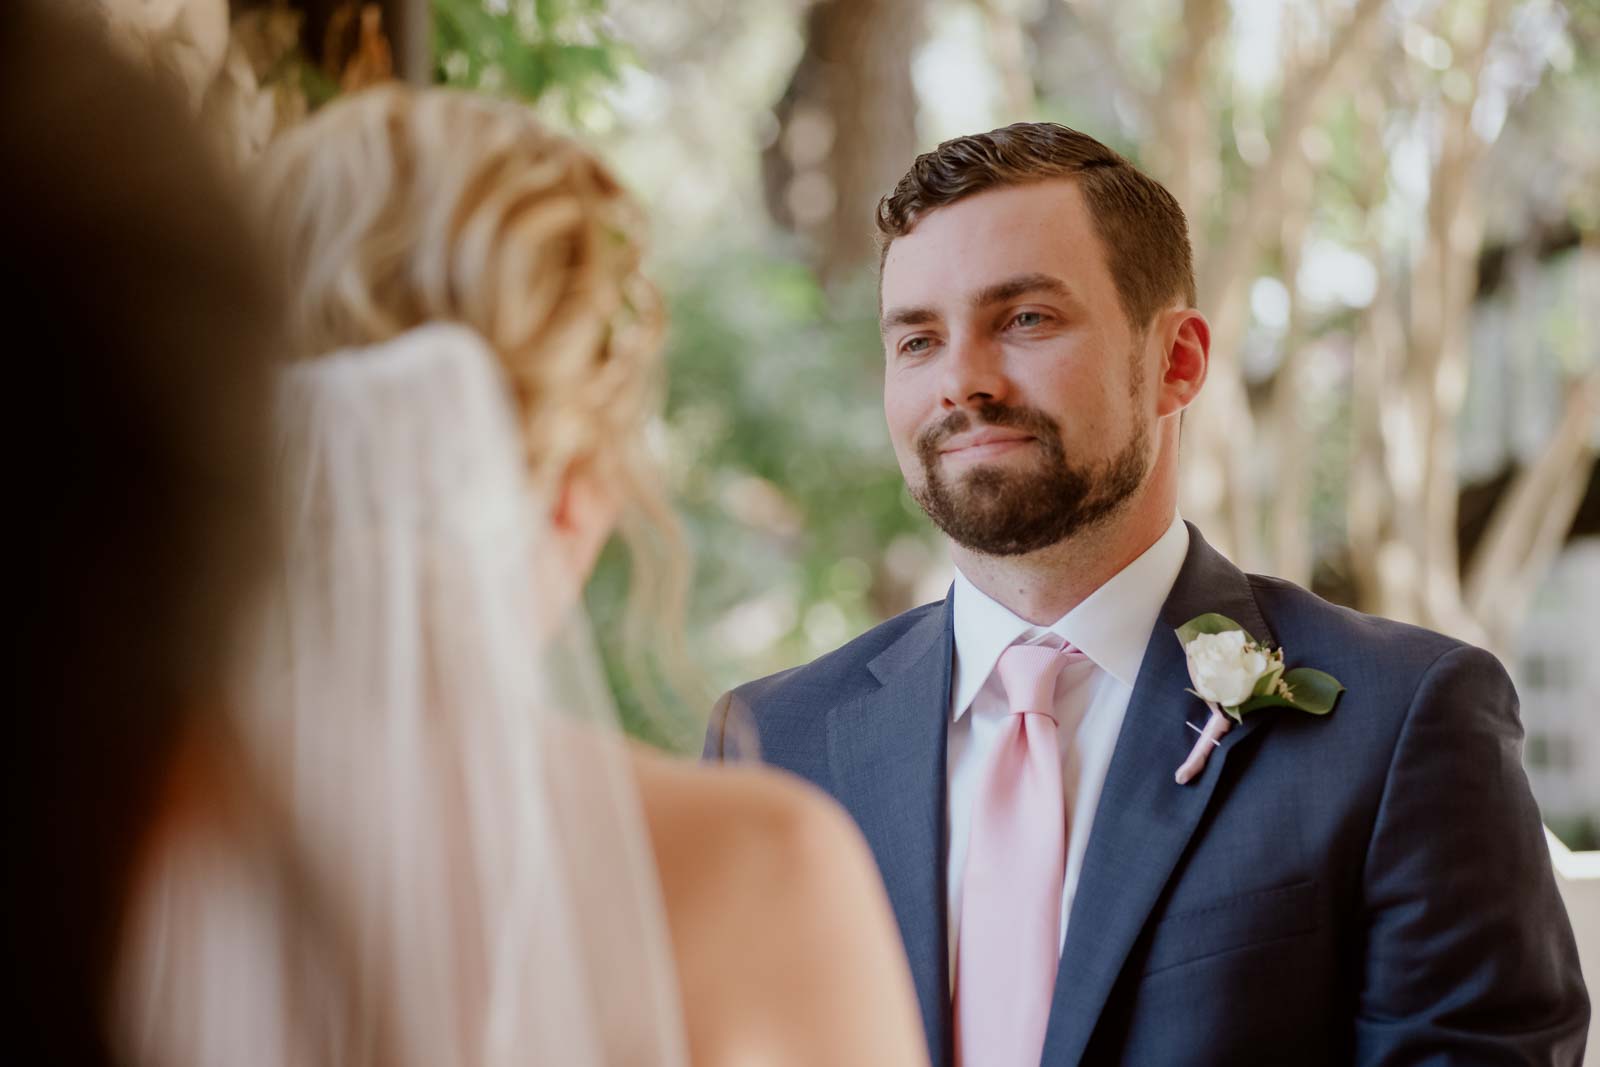 A close-up of the groom looking adoringly on his wife during the ceremony